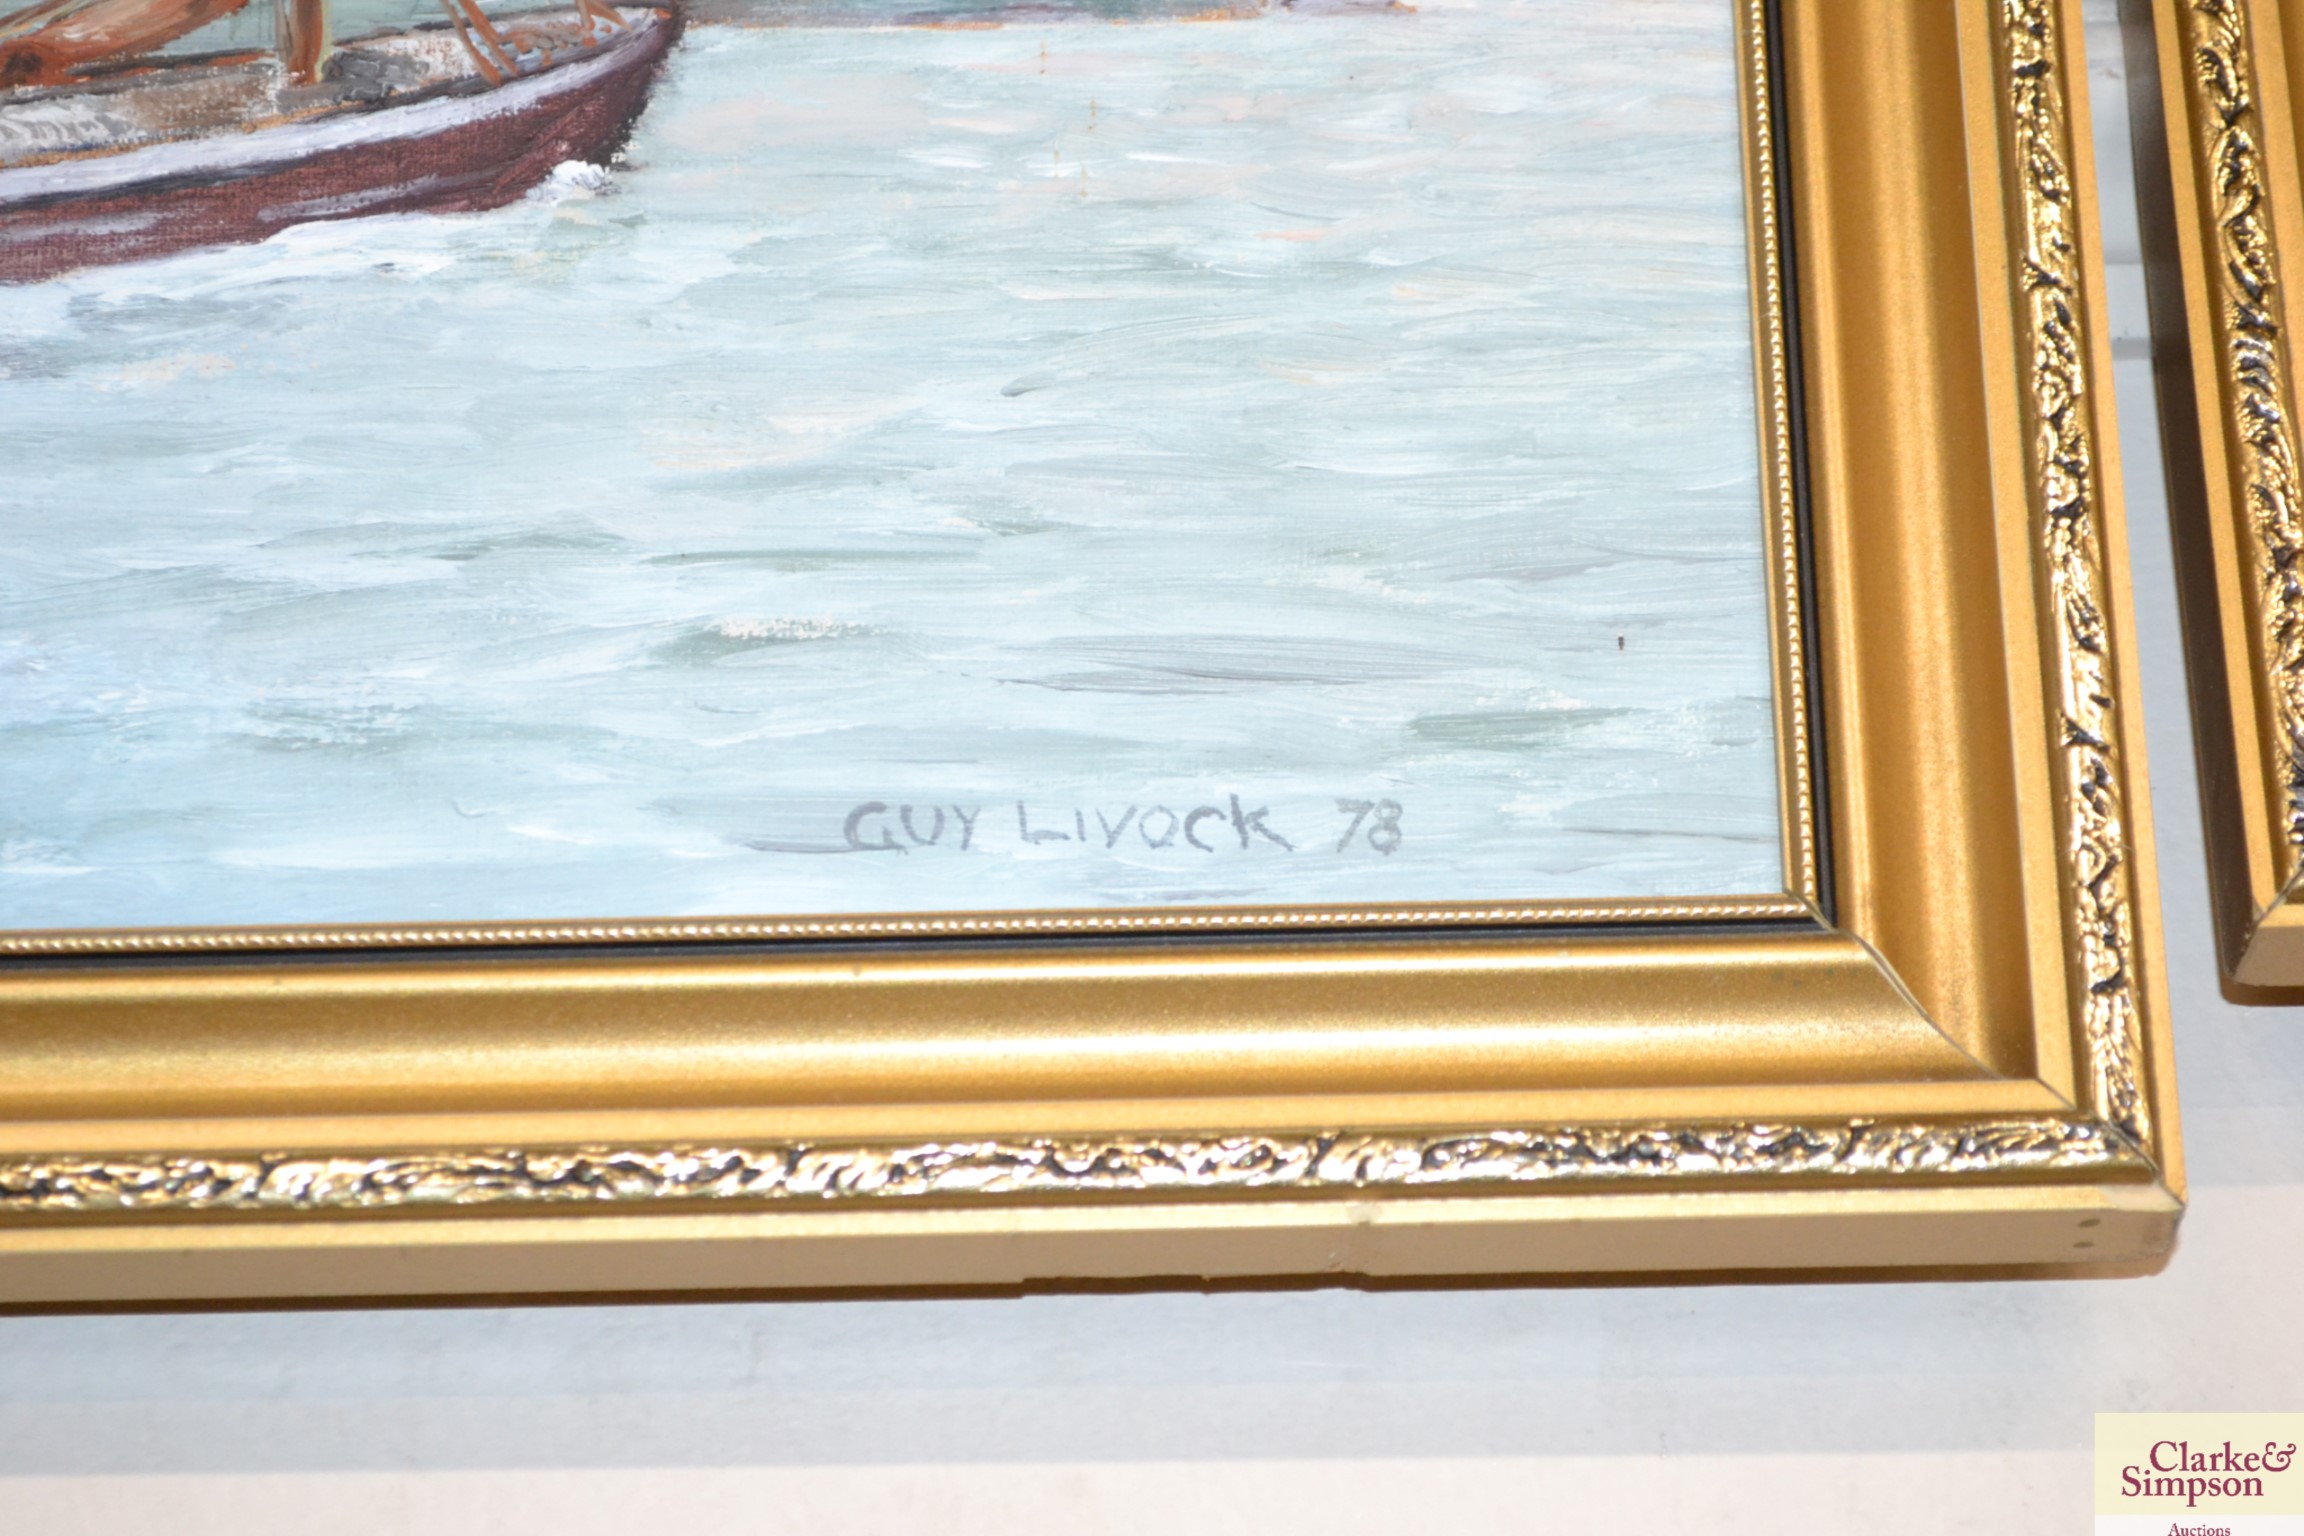 Guy Livock, oil on board study of a harbour scene - Image 4 of 4